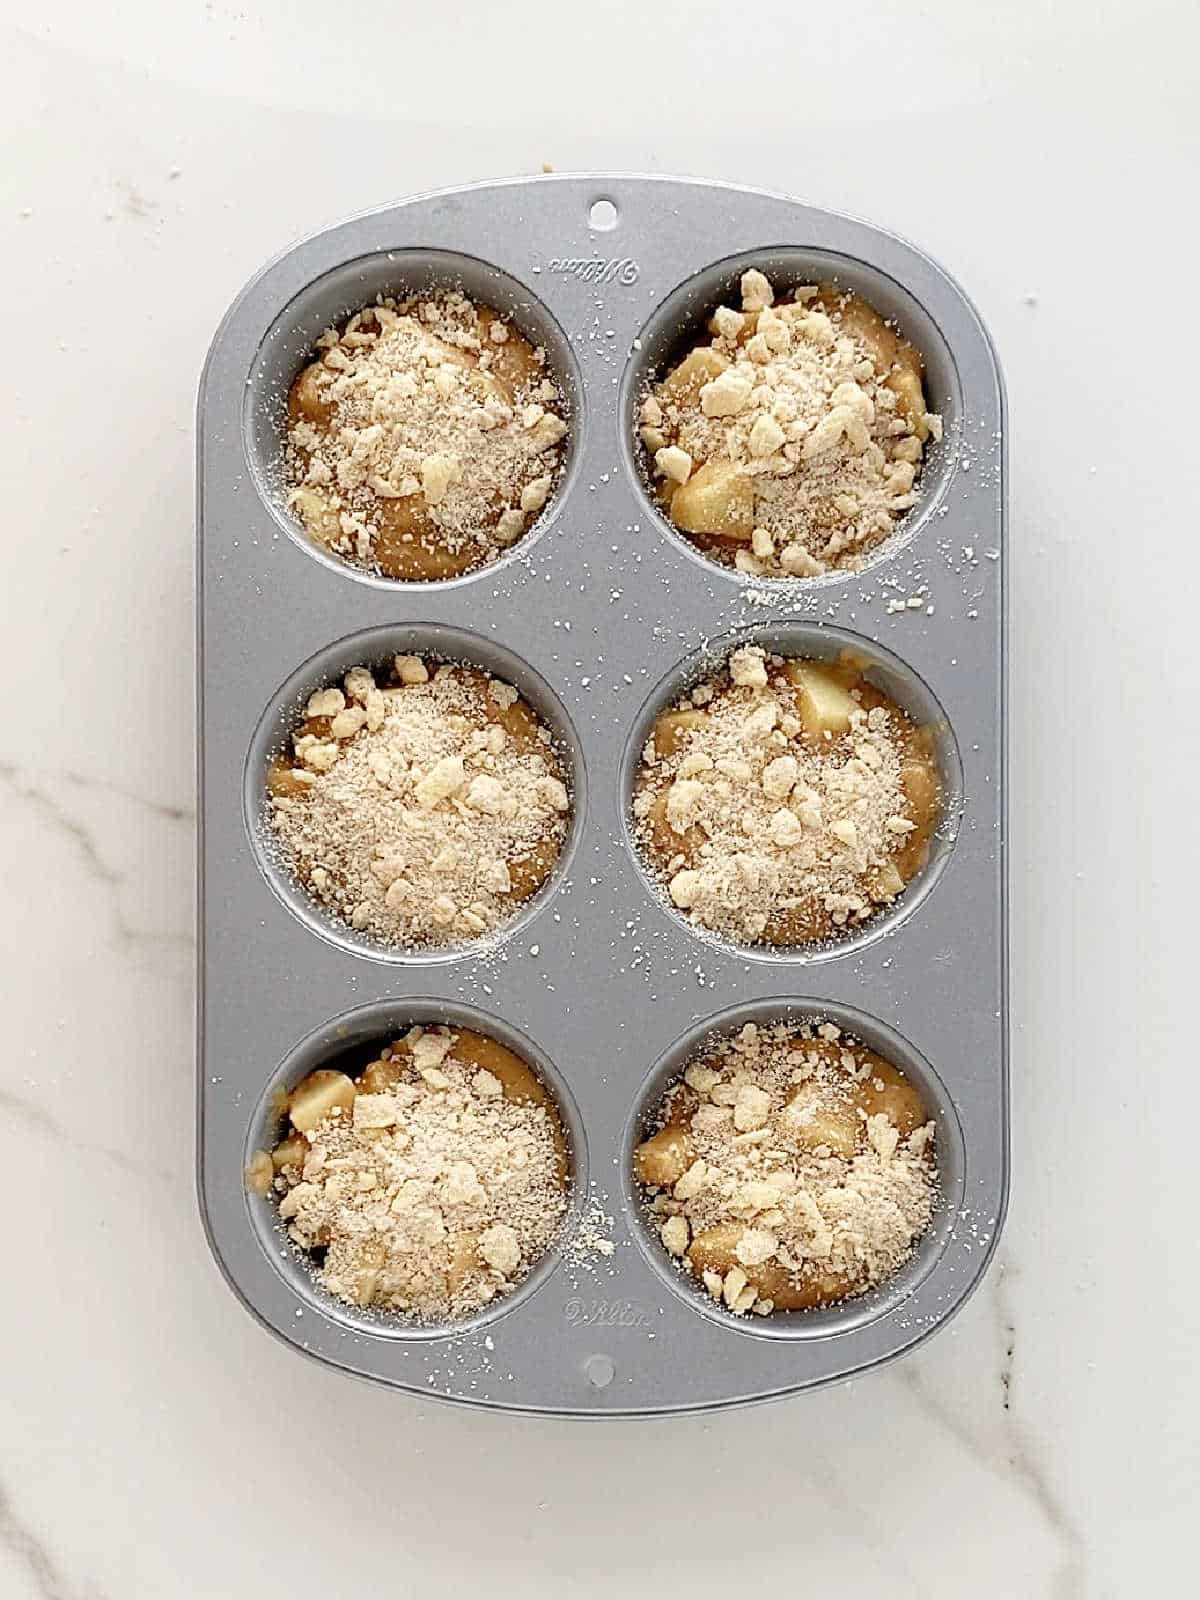 Metal jumbo muffin pan with apple crumb muffins before baking. White marbled surface.